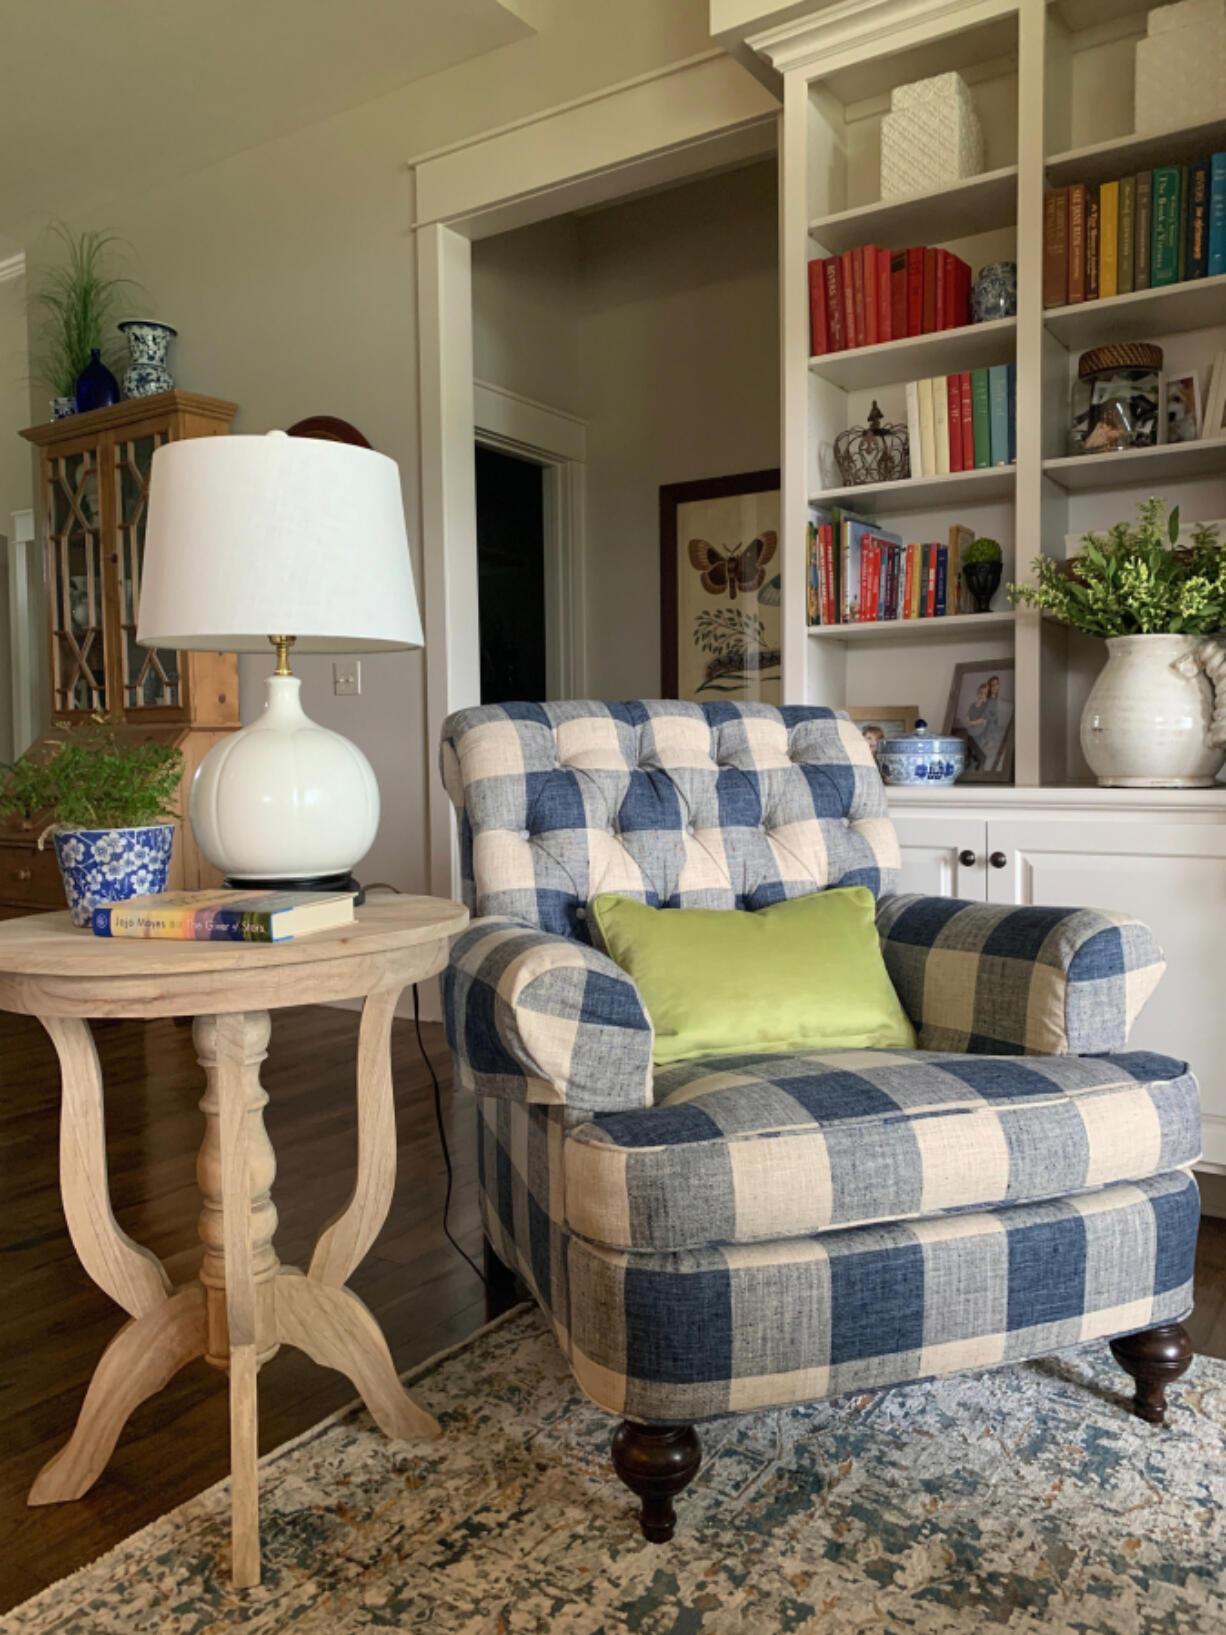 Buffalo check comes in a wide variety of color pairings and is a versatile textile that can translate to anything from traditional to modern farmhouse depending on the use.